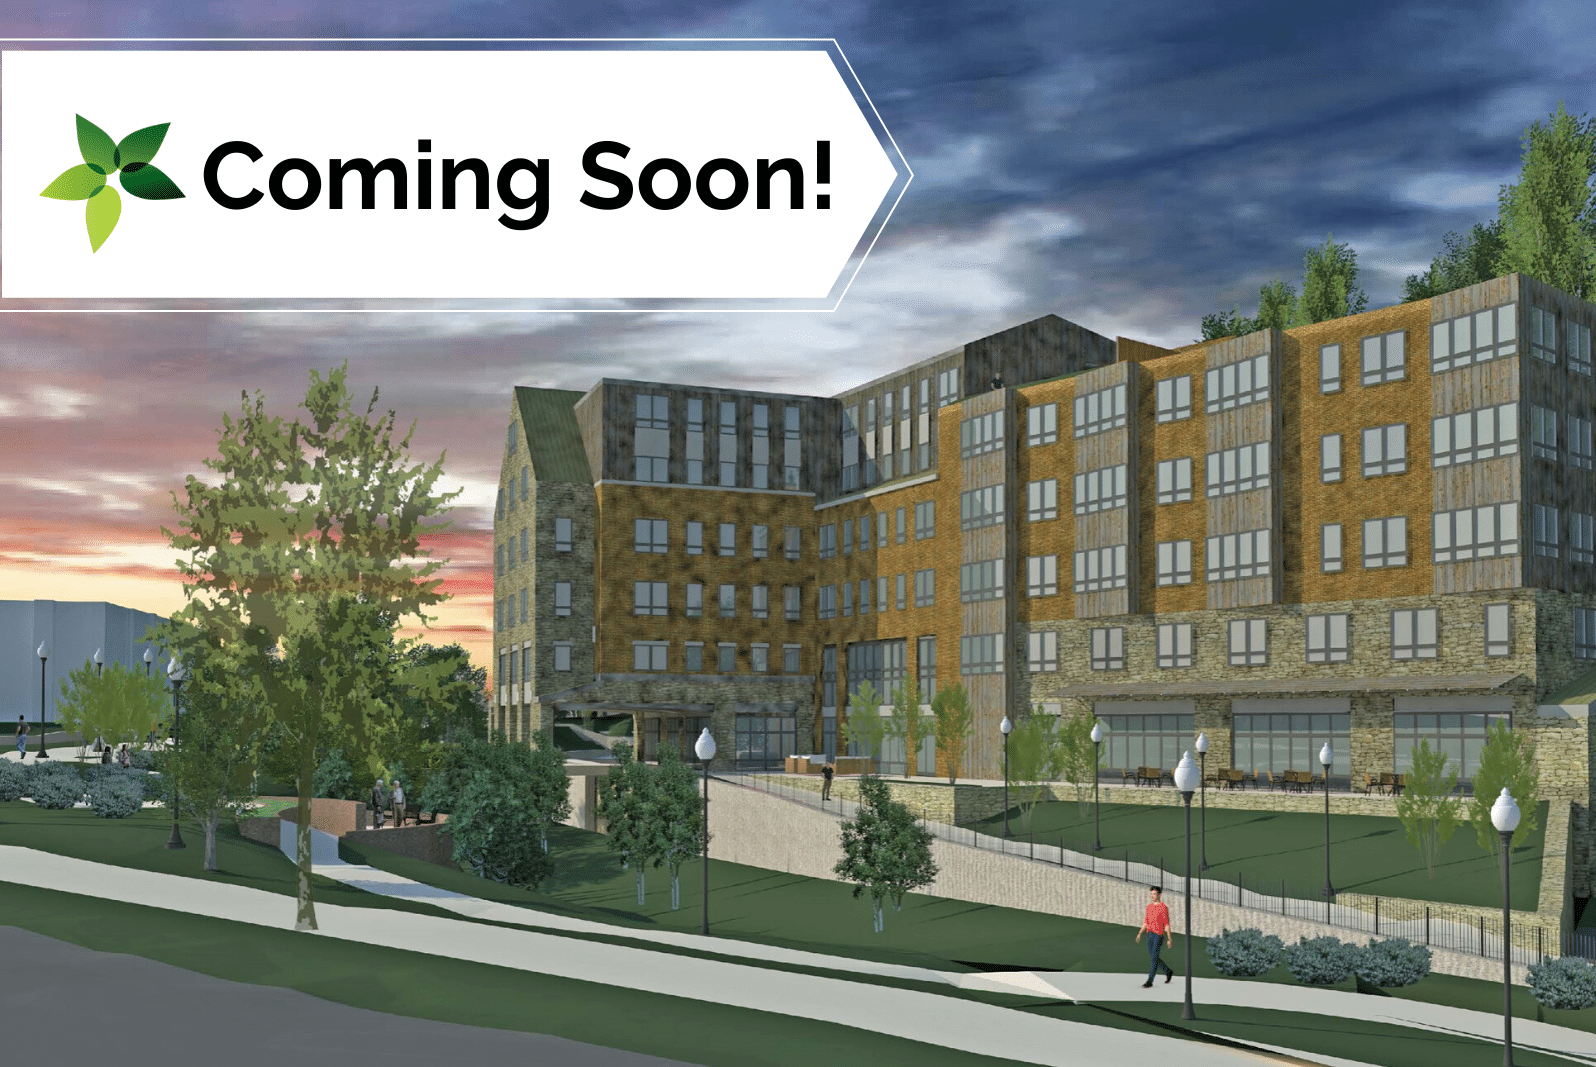 the-residence-at-bala-cynwyd---coming-soon-image-1